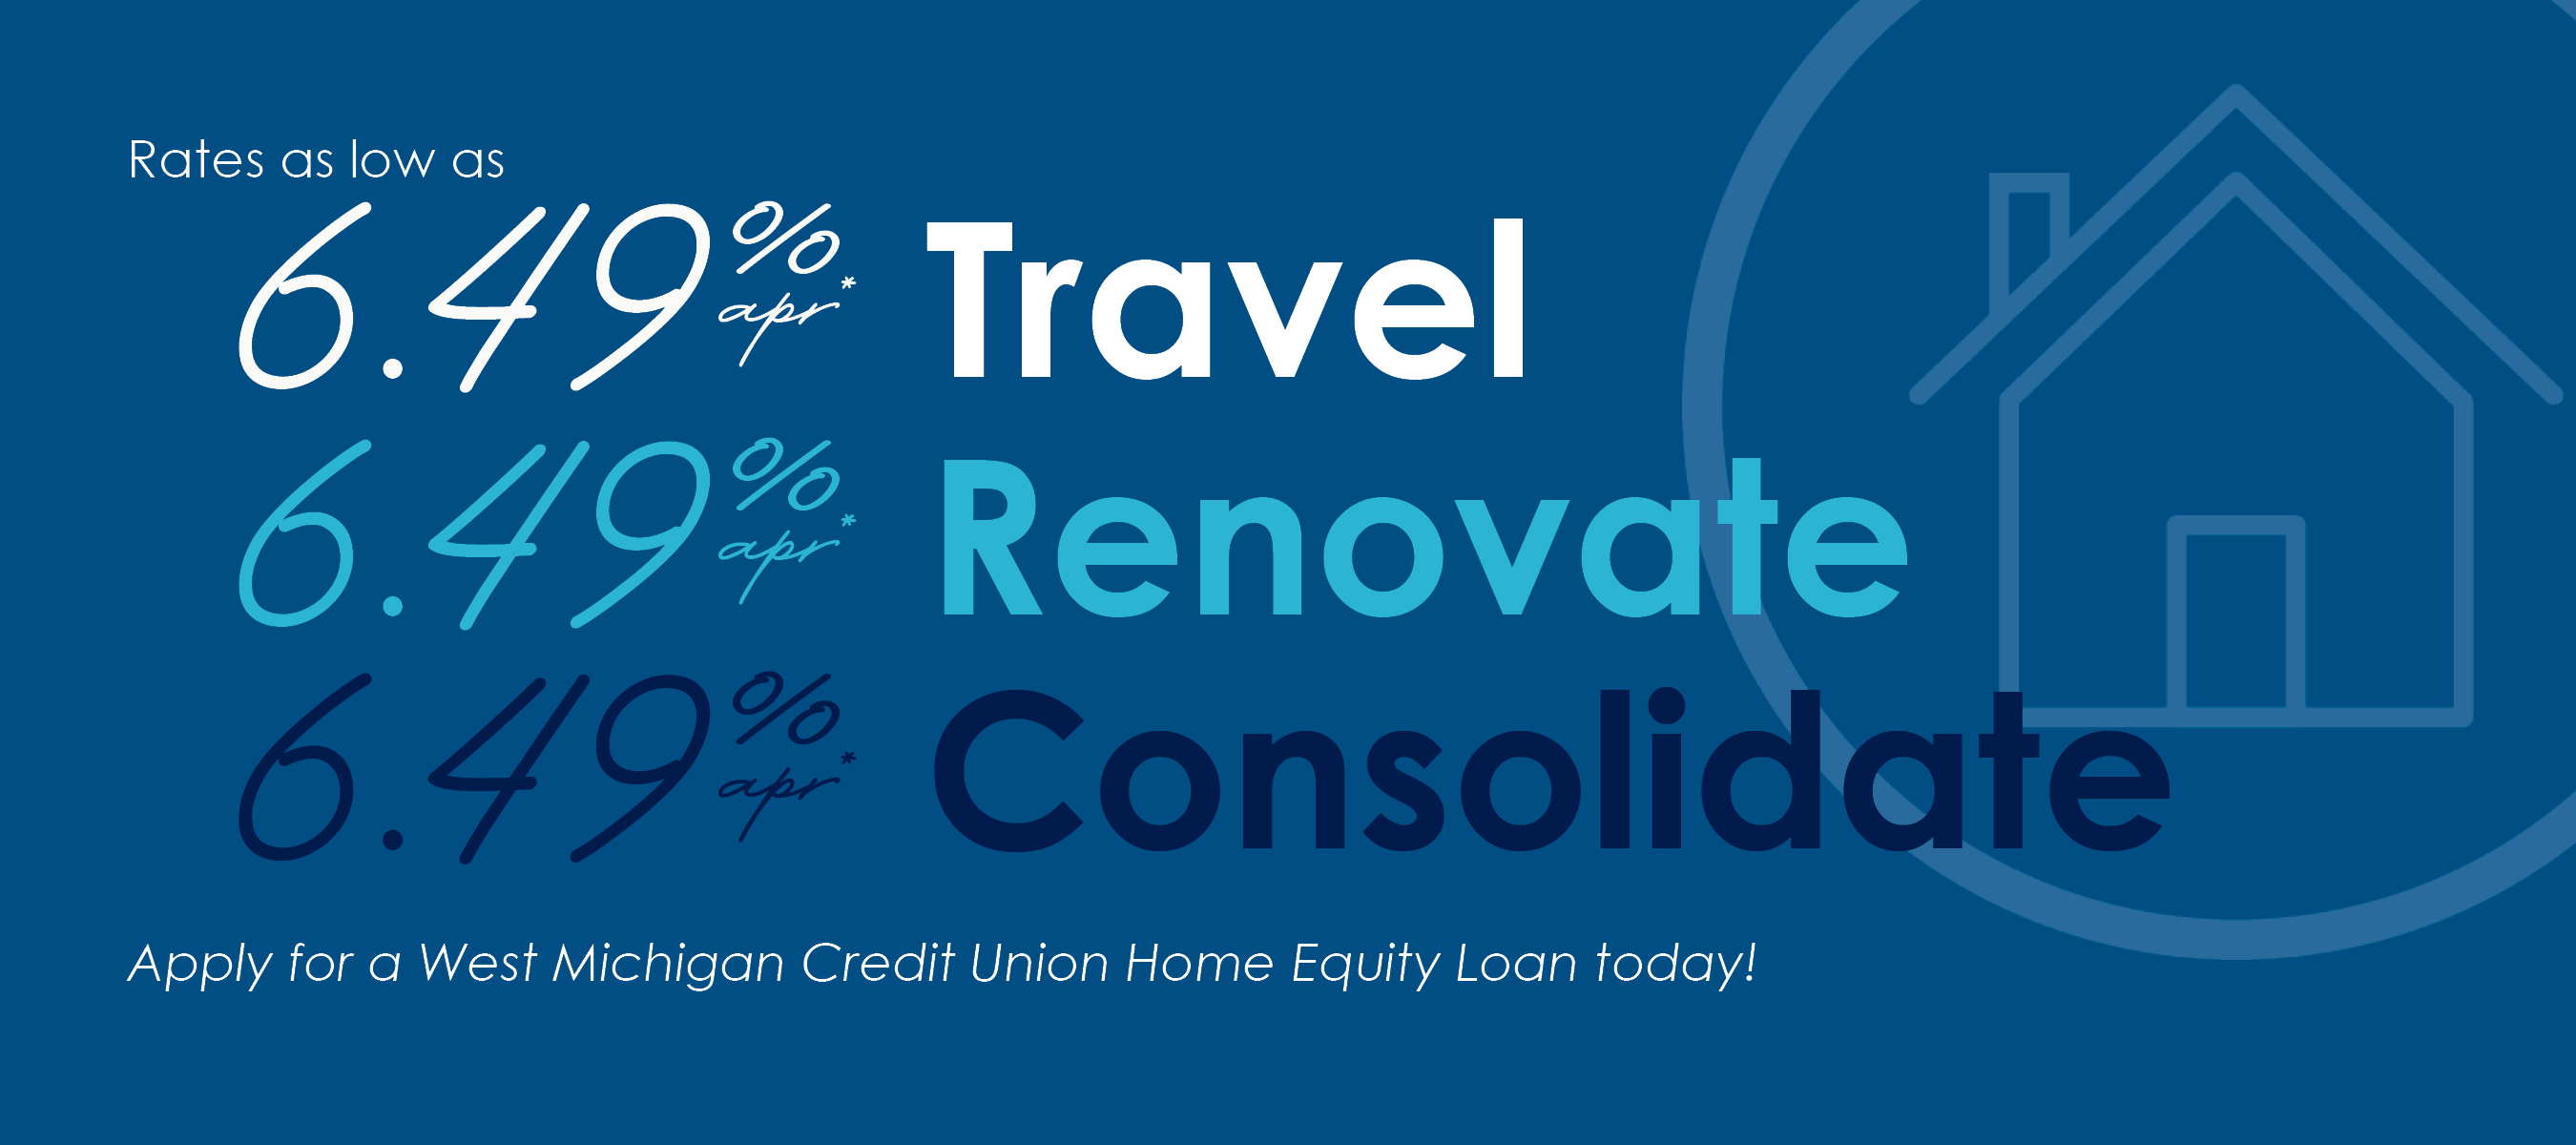 Home Equity Promotion - Travel, Renovate, Consolidate